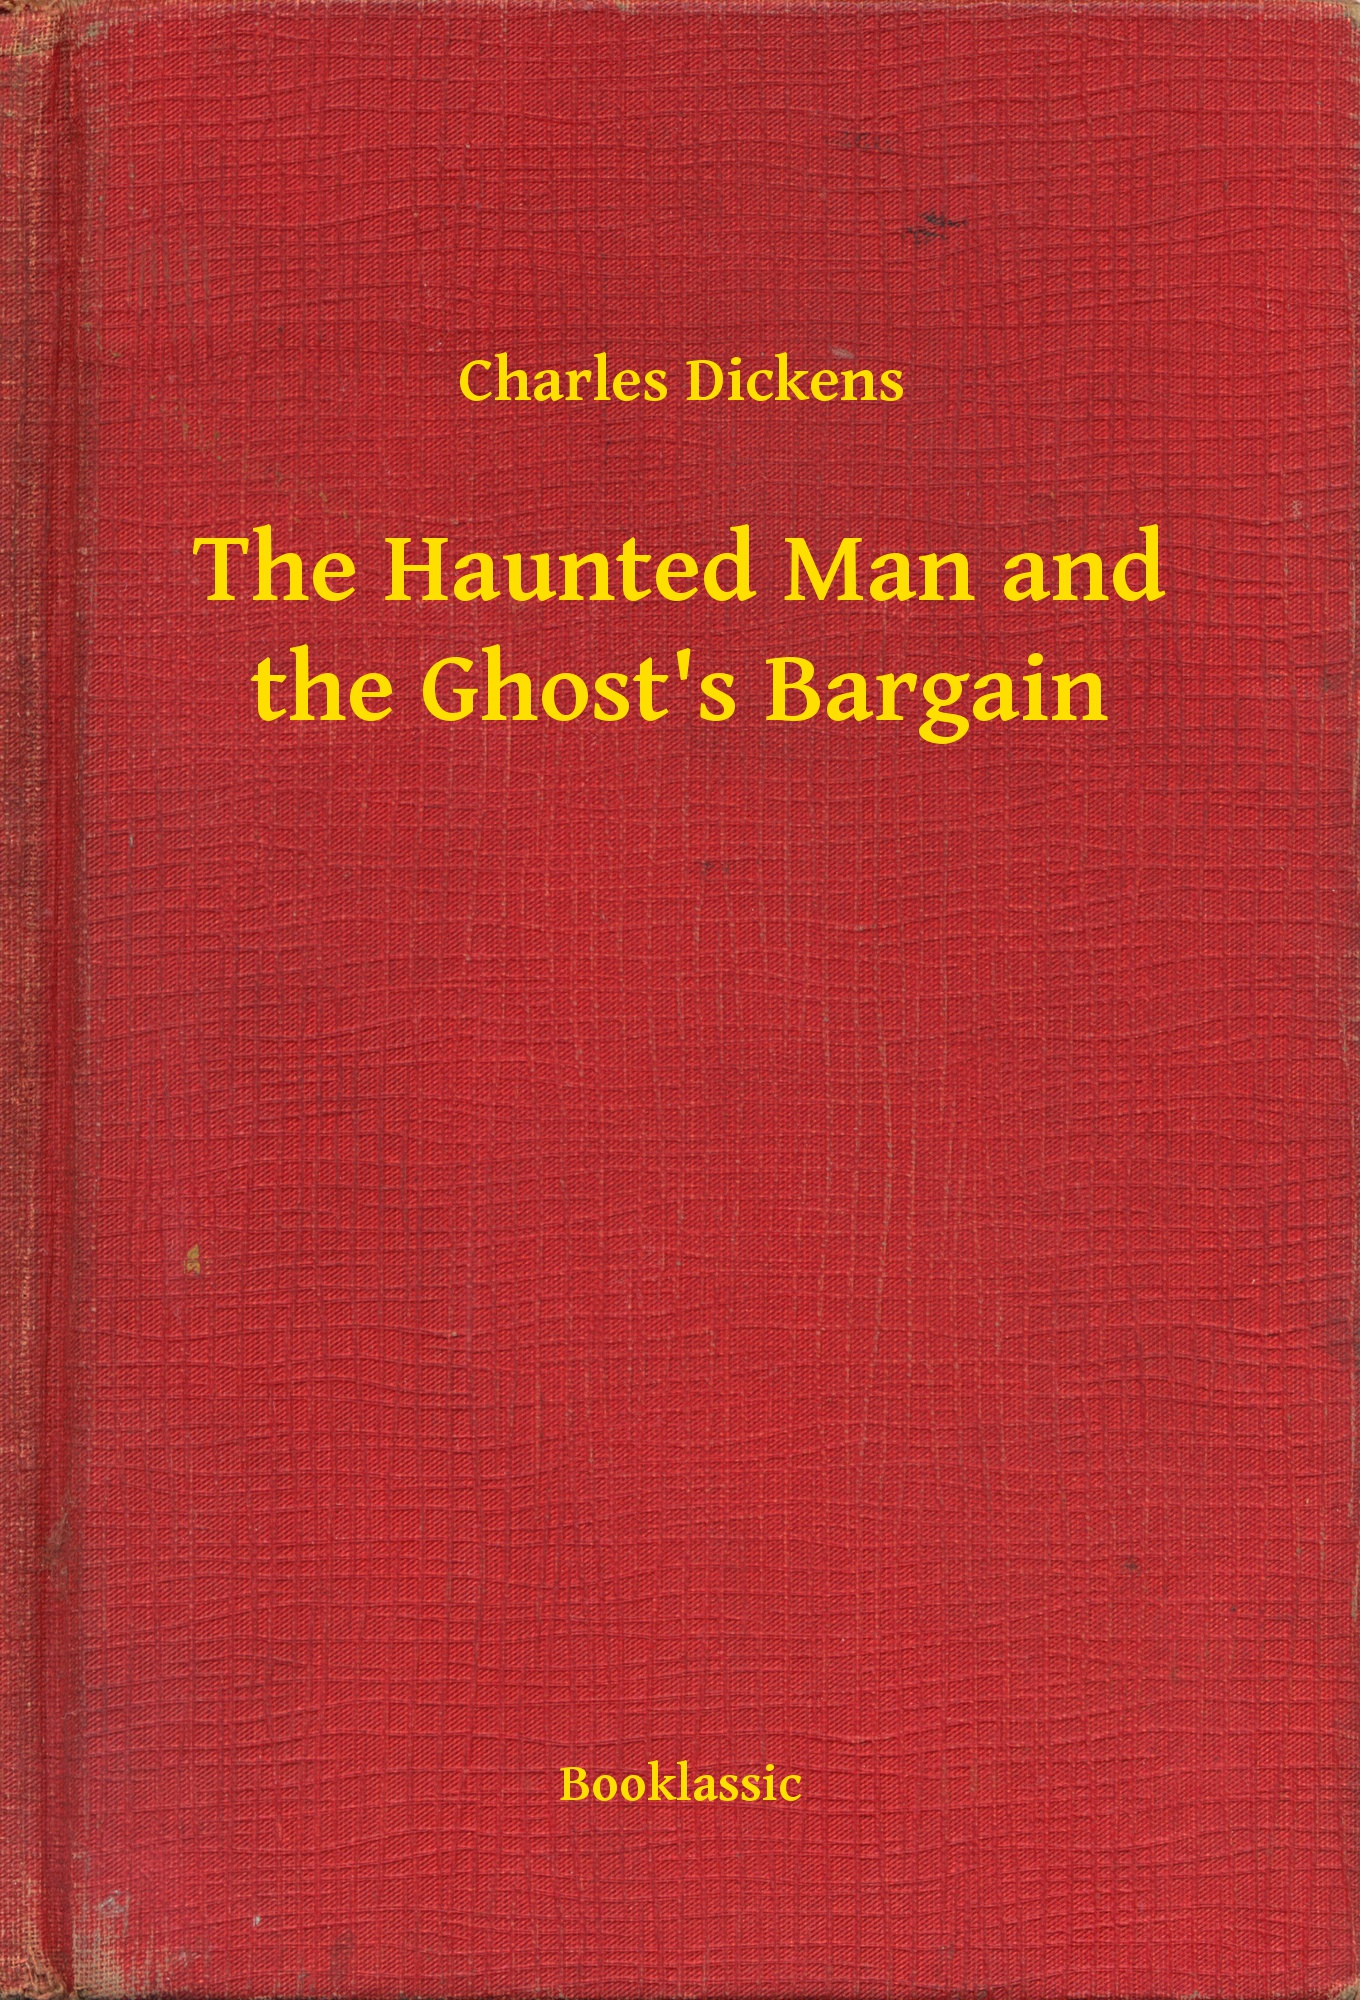 The Haunted Man and the Ghost"s Bargain